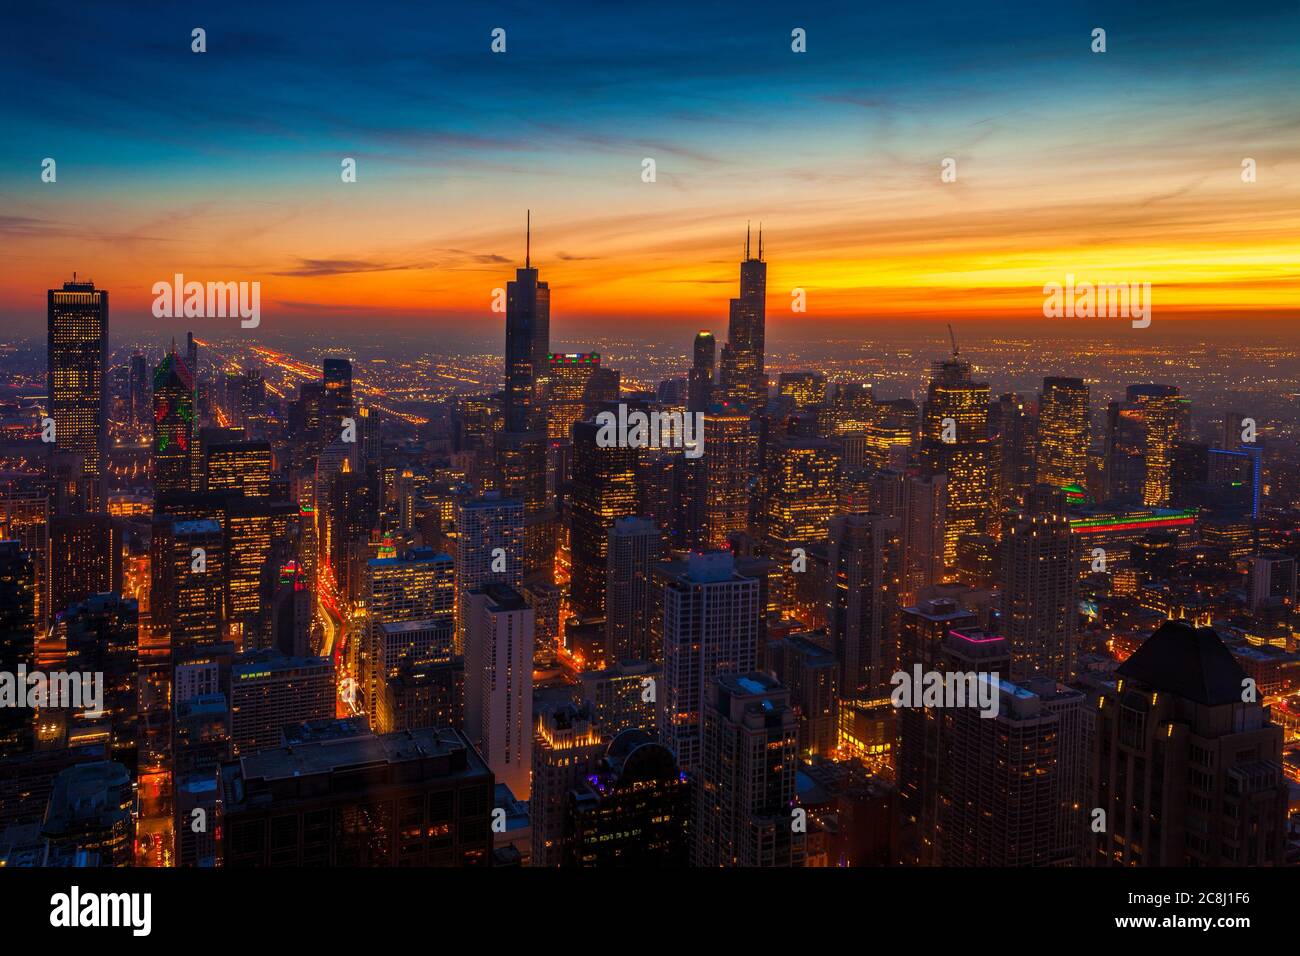 Aerial view of the Chicago skyline just after sinset Stock Photo